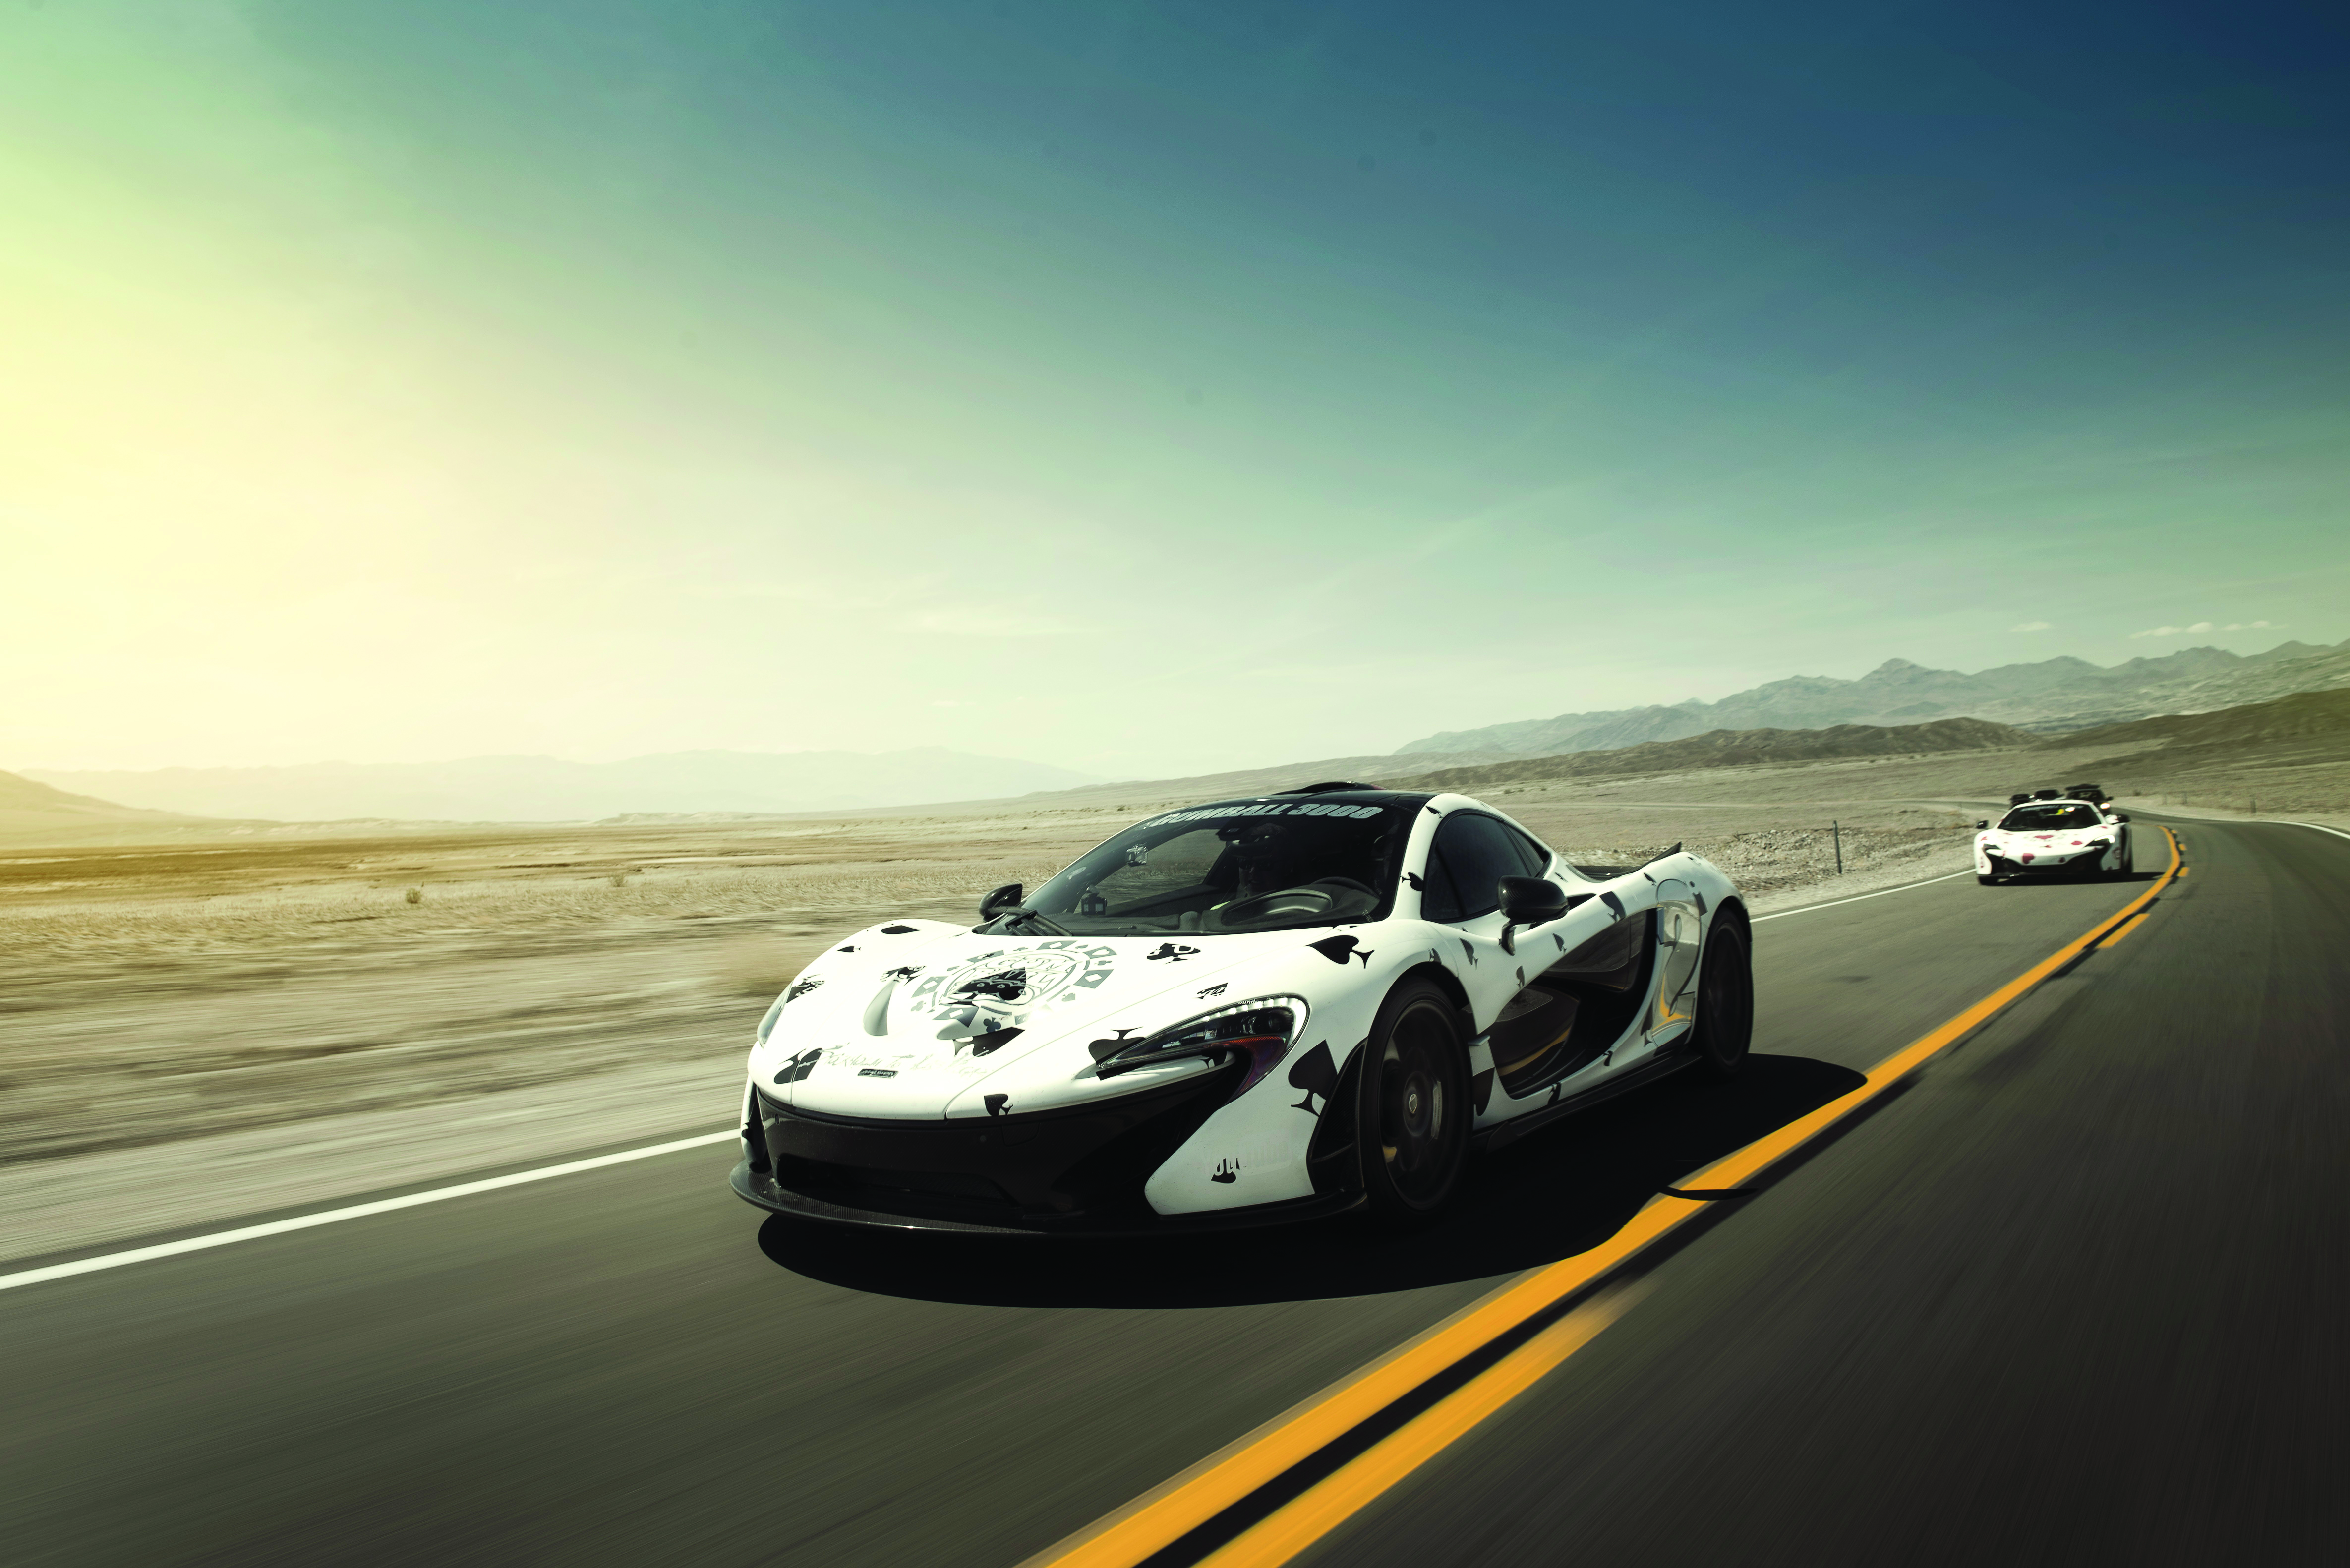 The Middle East Gumball 3000 Rally: PK Partnership are proud to be the official insurance partner